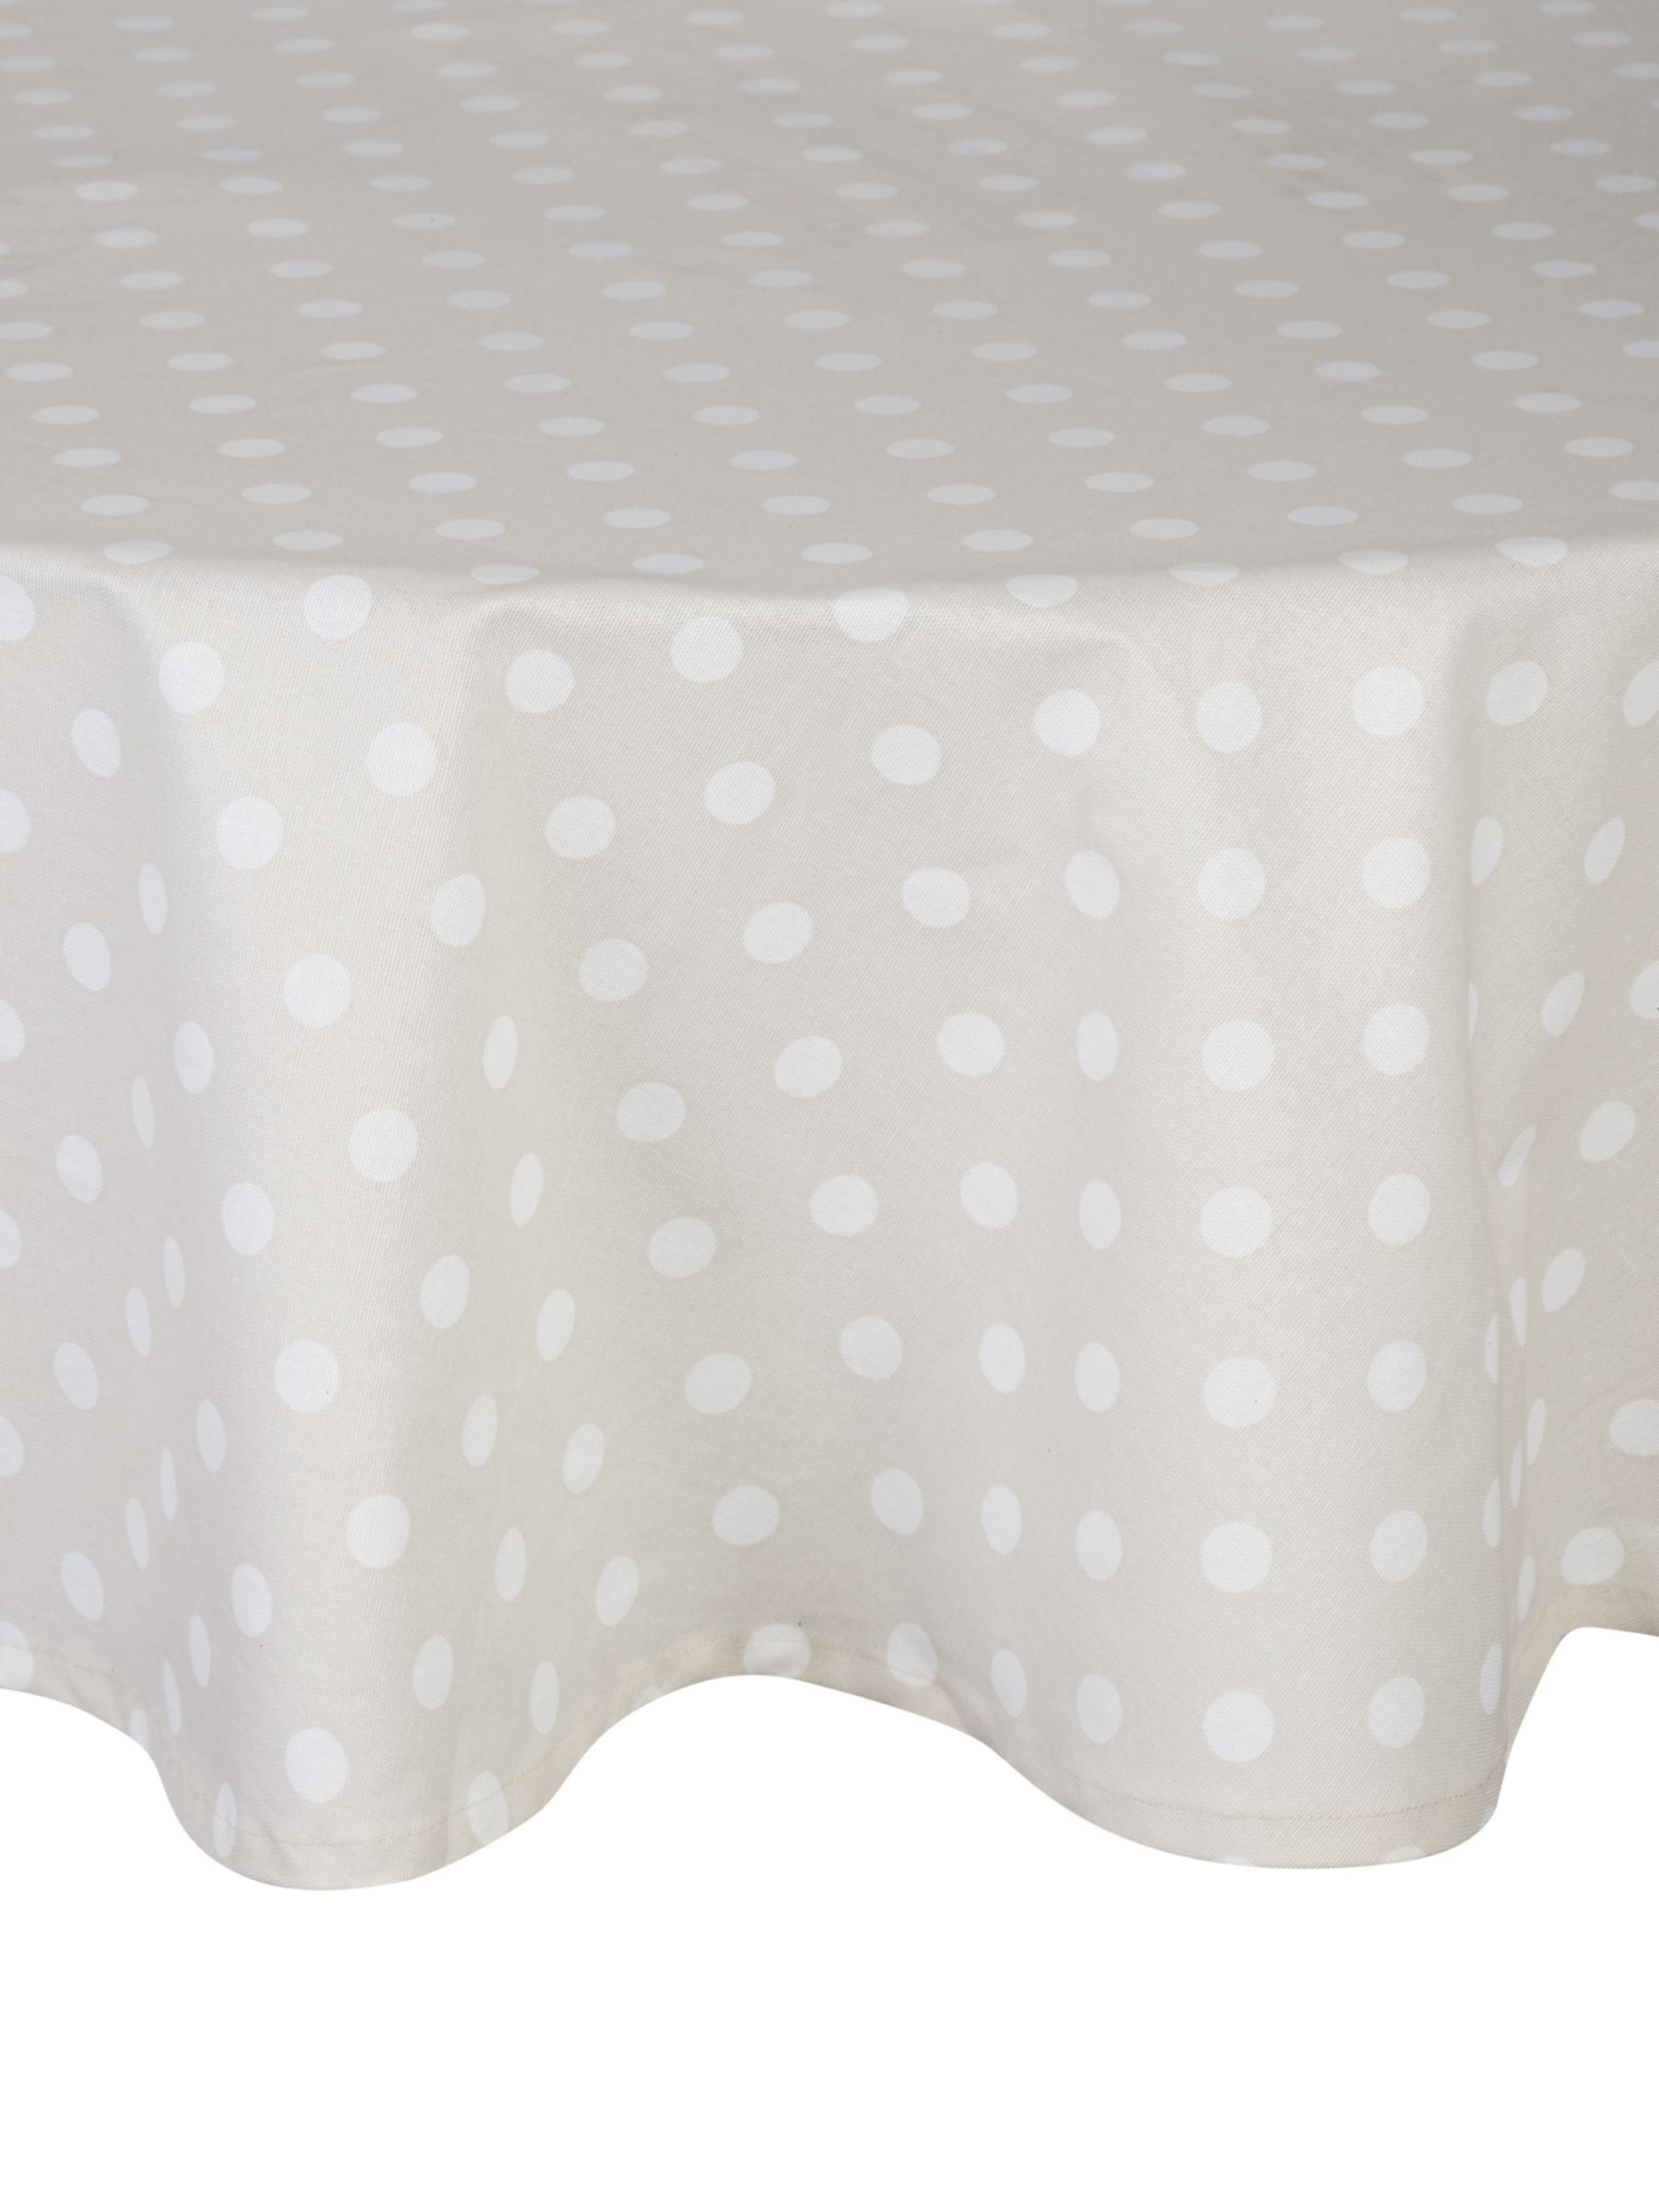 John Lewis Polka Dot Wipe Clean Round Tablecloth Review